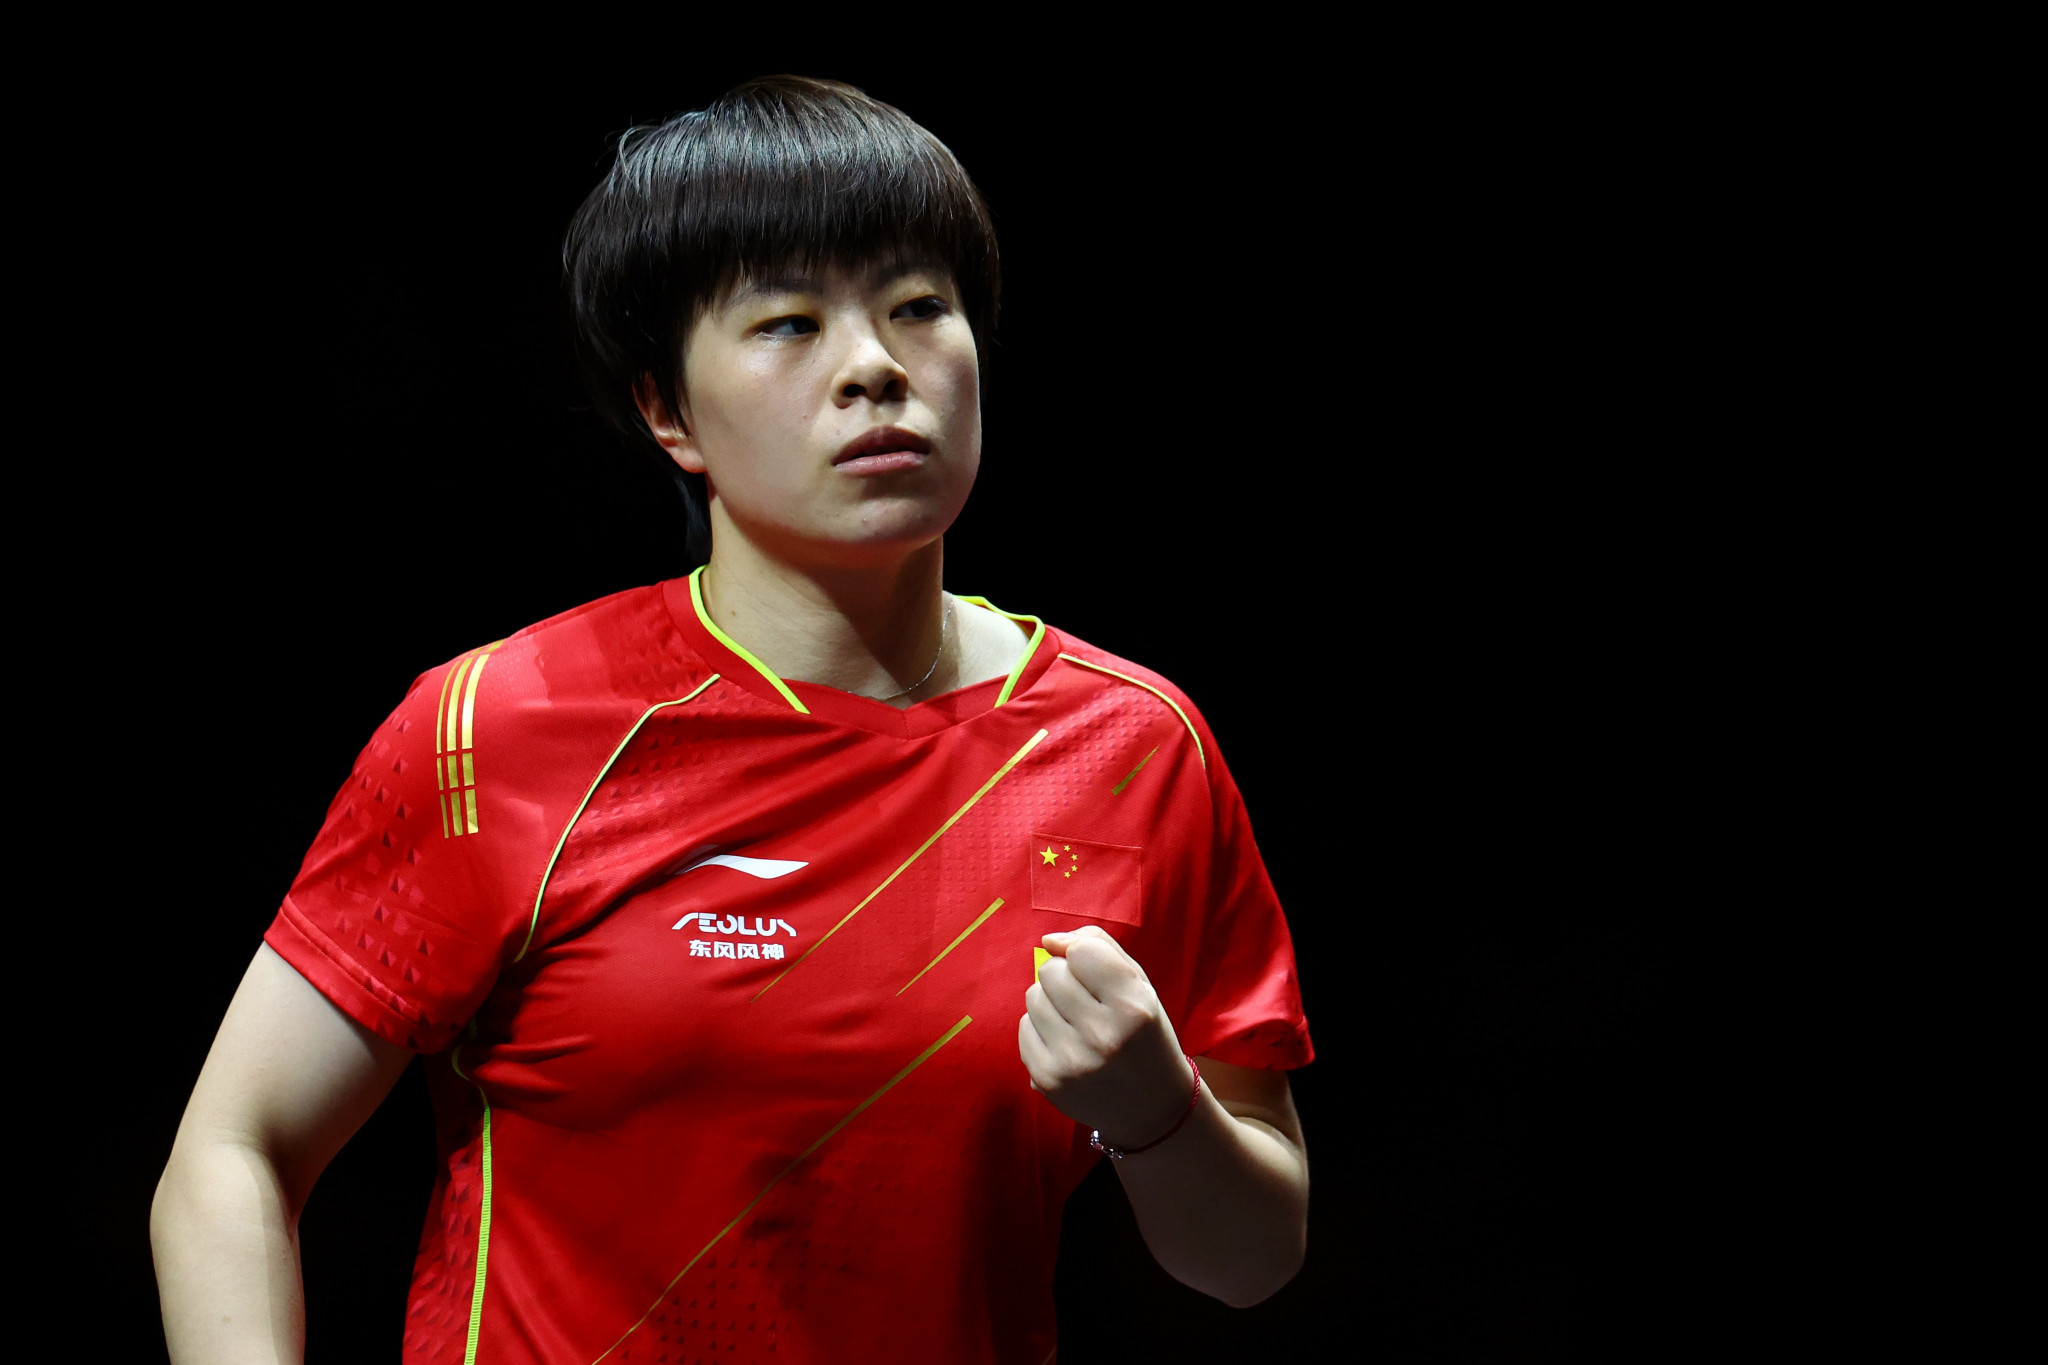 Wang Yidi came from behind to defeat world number one Chen Meng in Singapore ©Getty Images